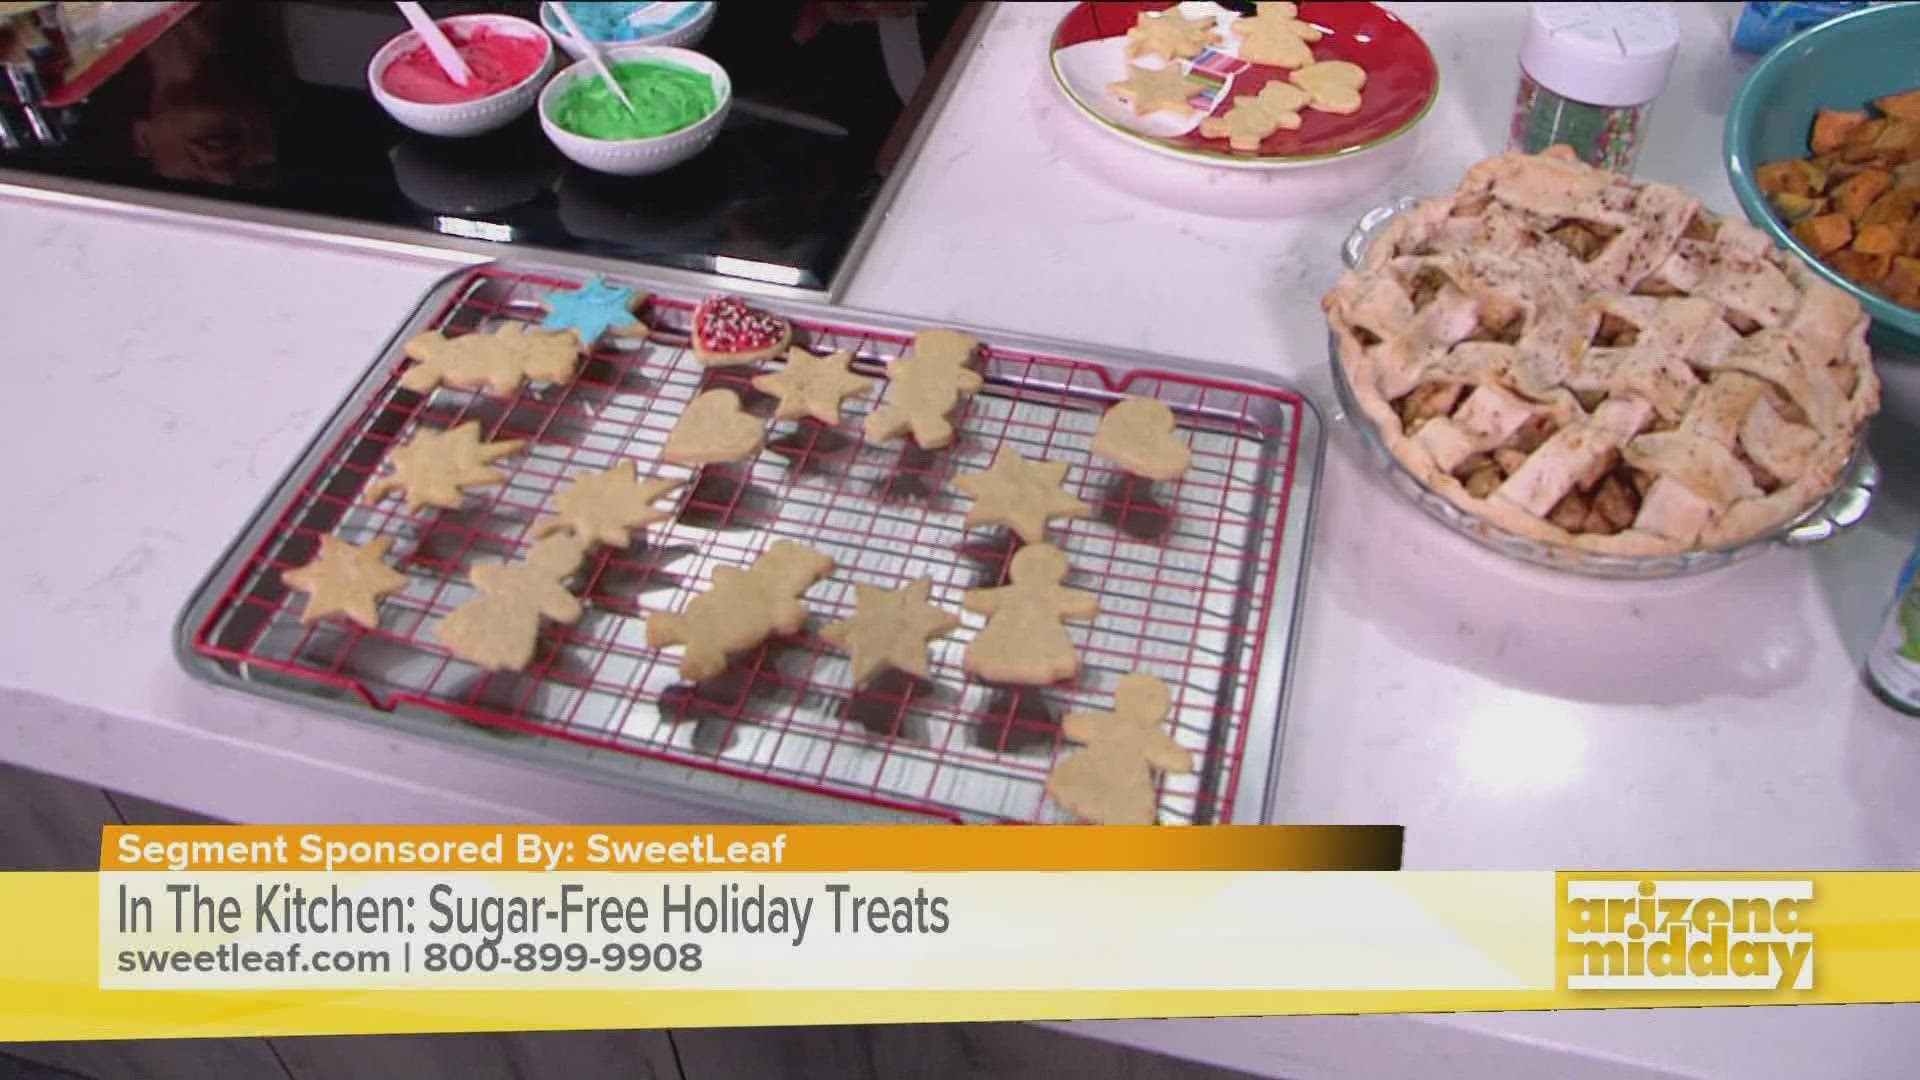 SweetLeaf nutrition expert and product manager Claudia Baker shows us how to make delicious treats without the calories.